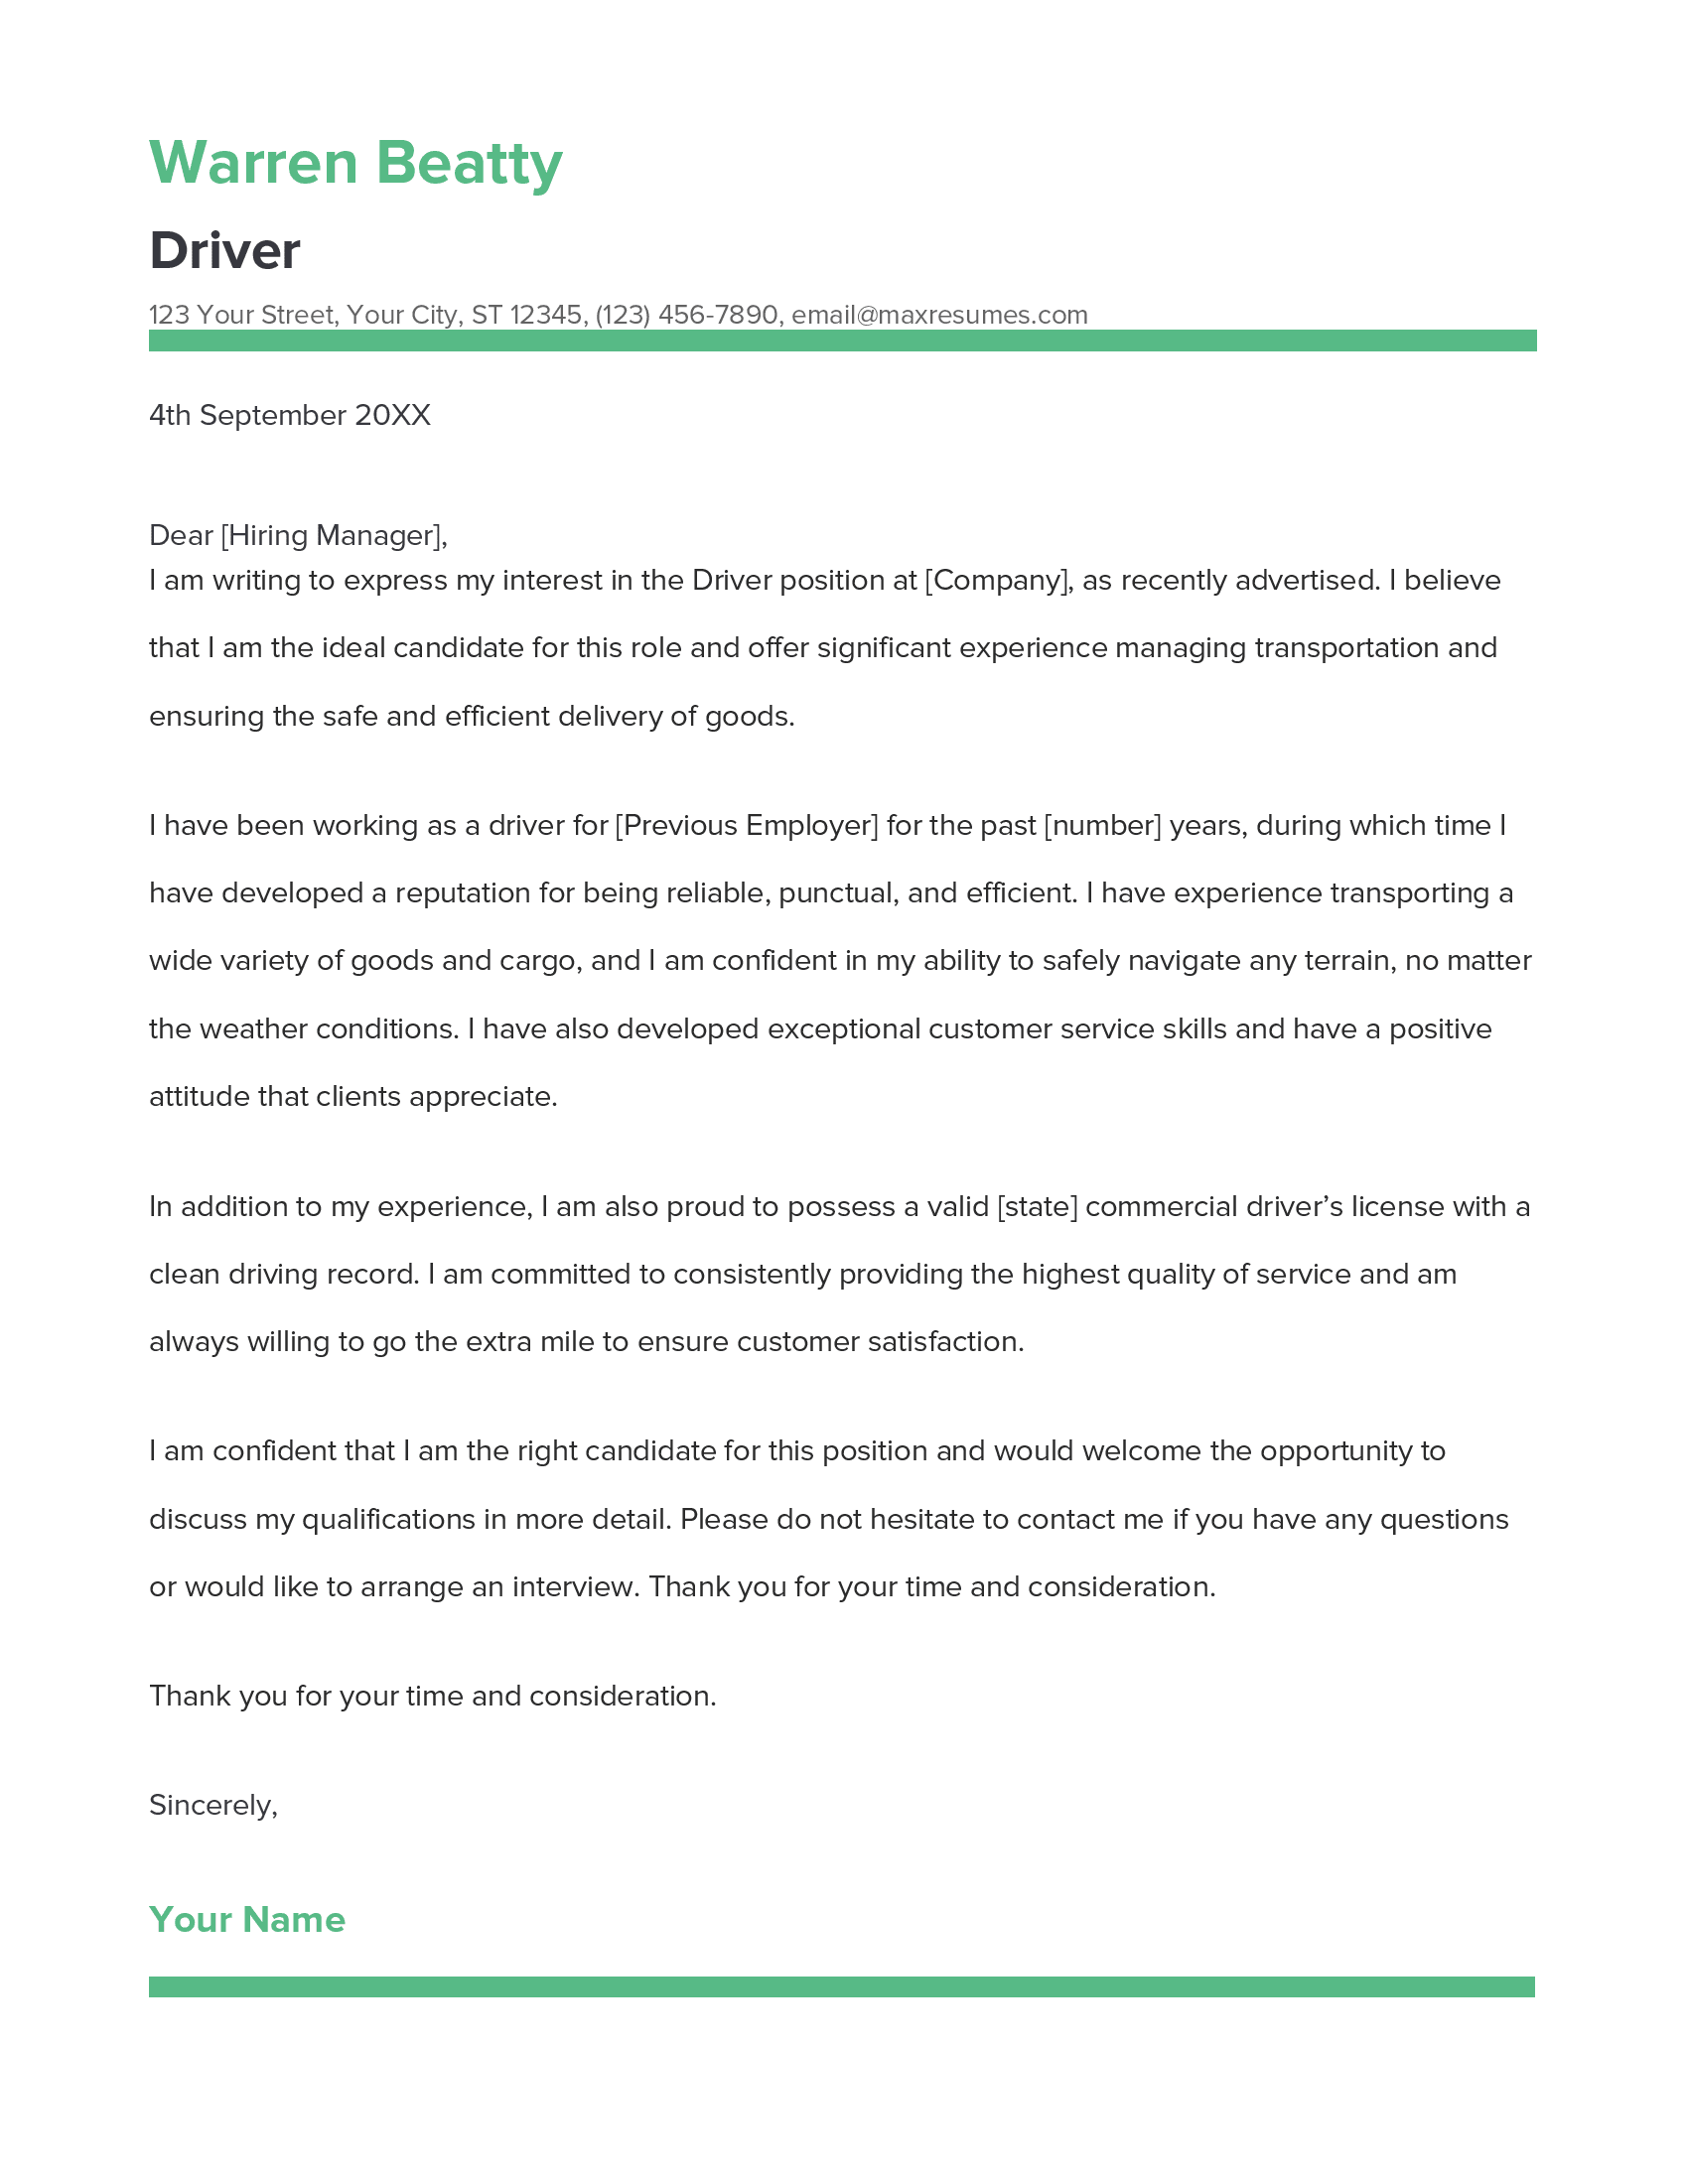 Driver Cover Letter Example